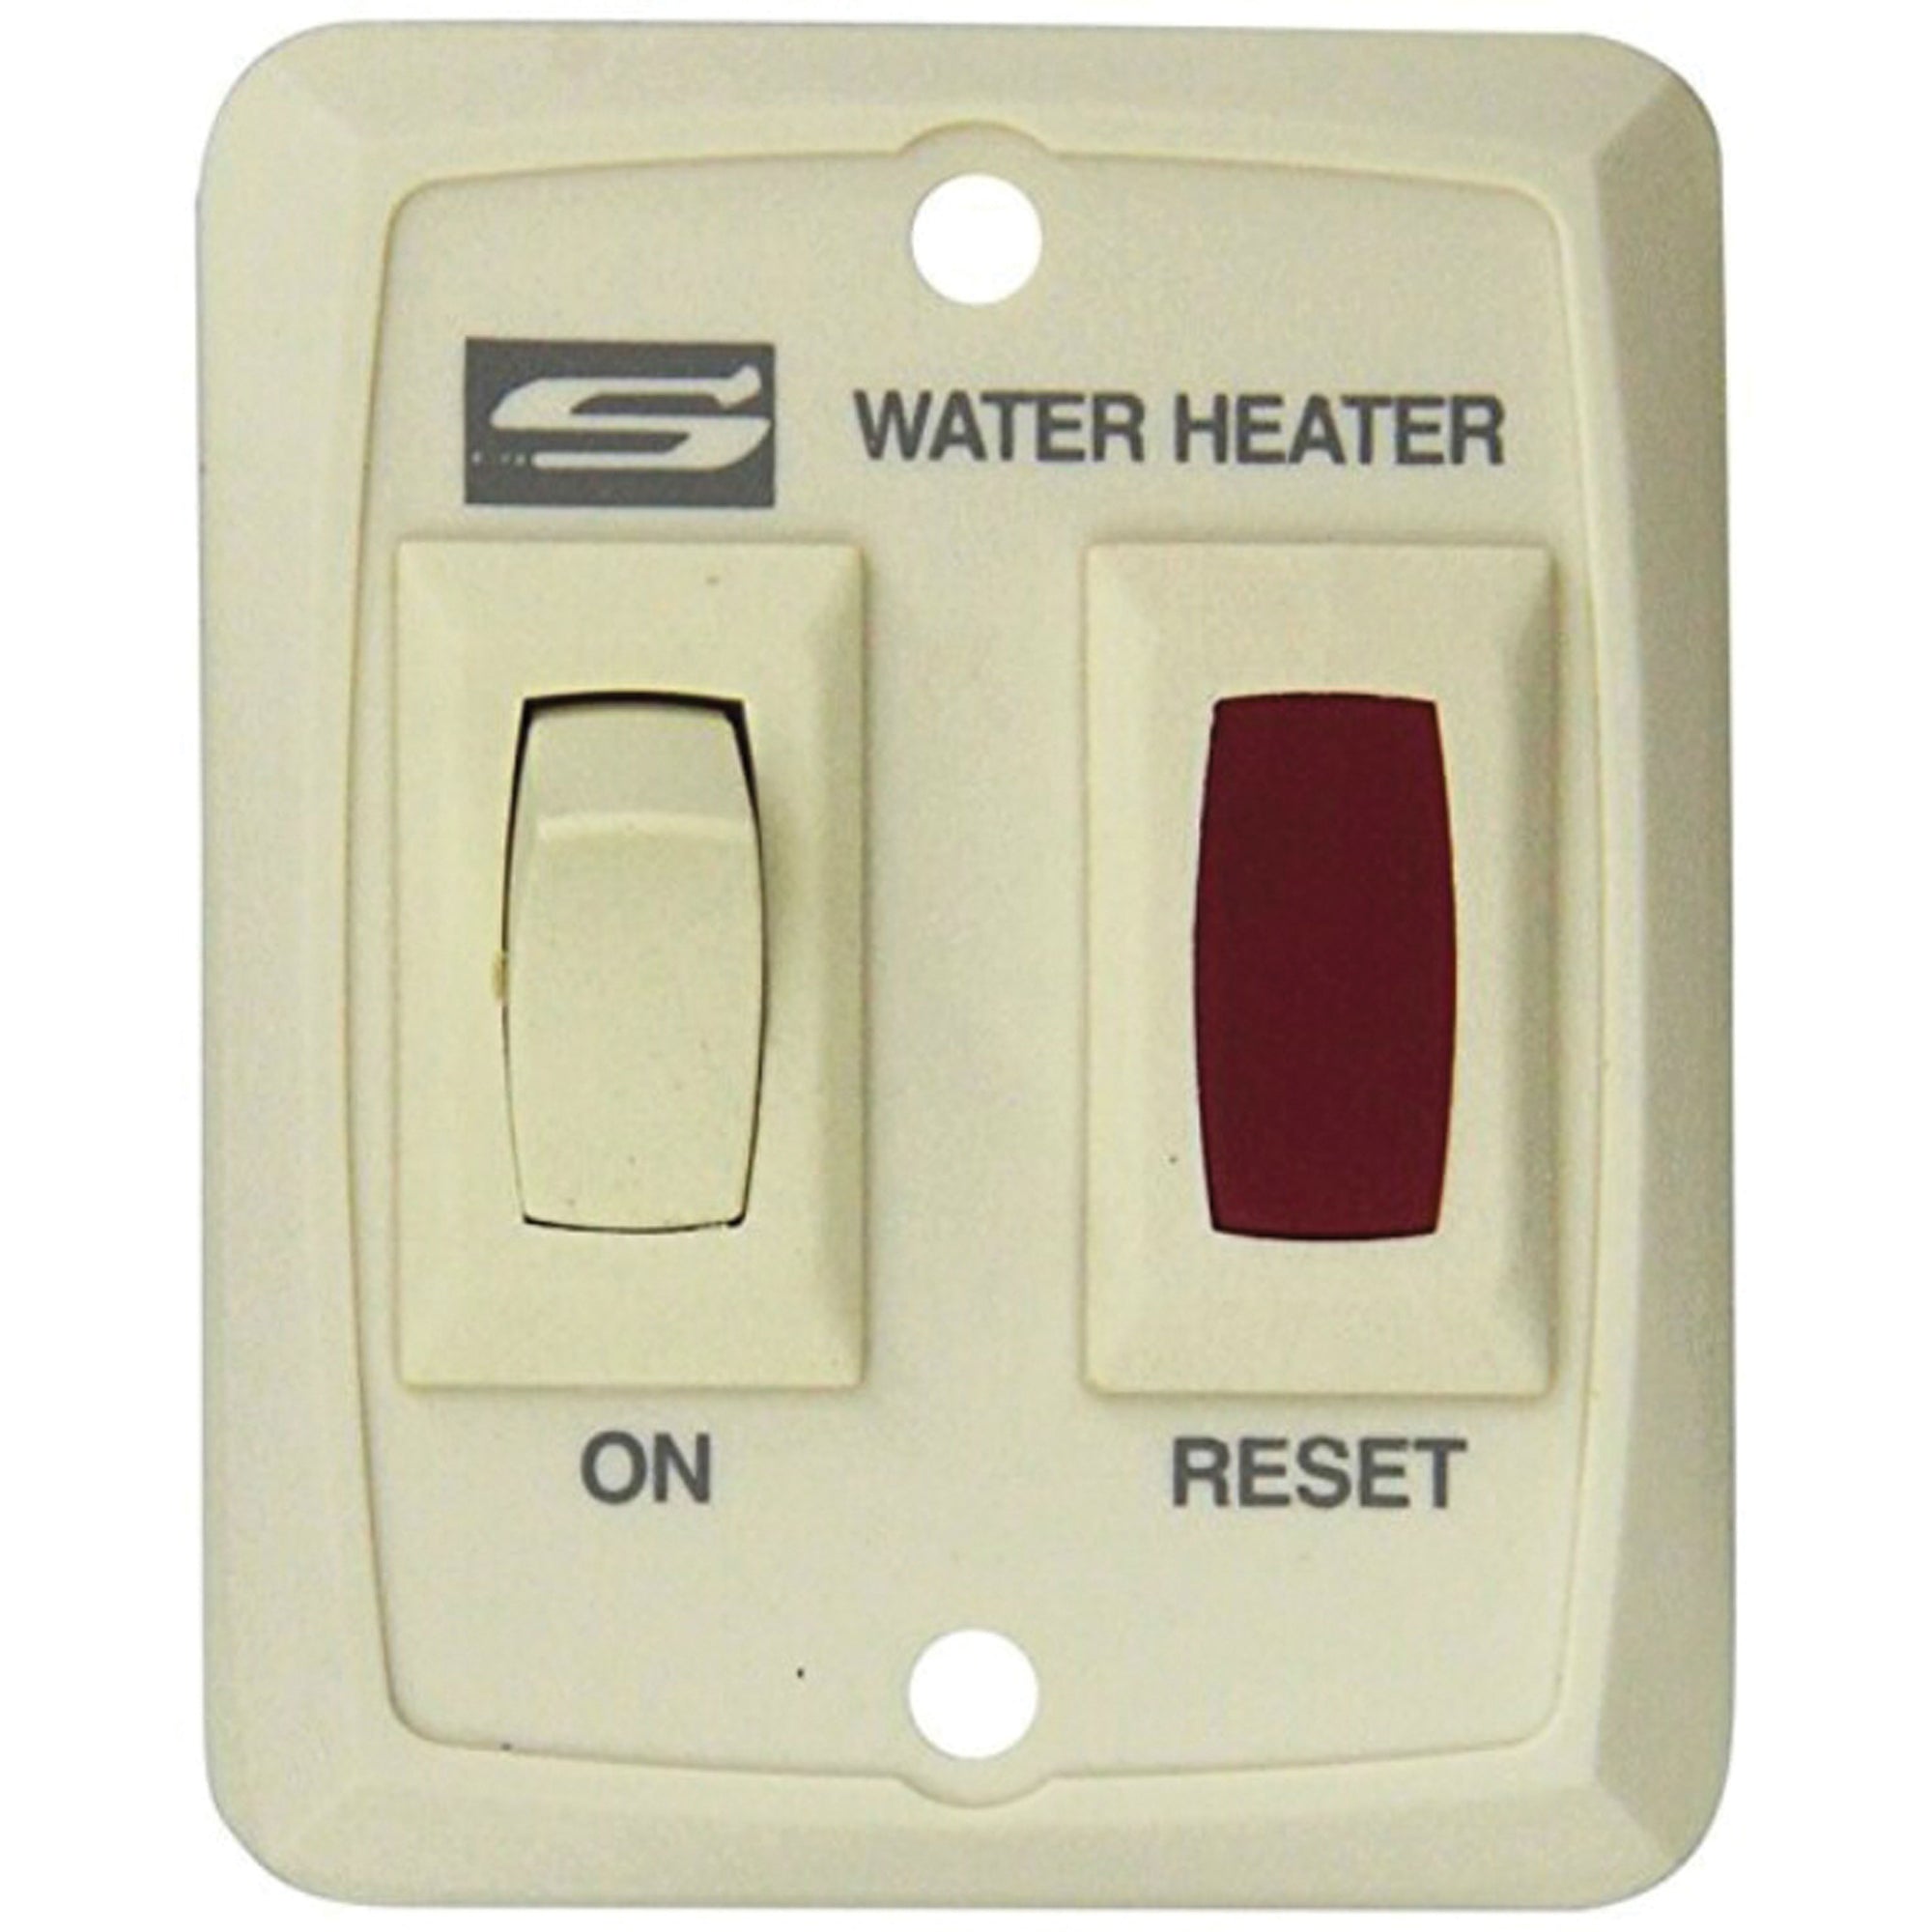 Suburban 234795 Standard Water Heater Wall Switch Assembly - Cream